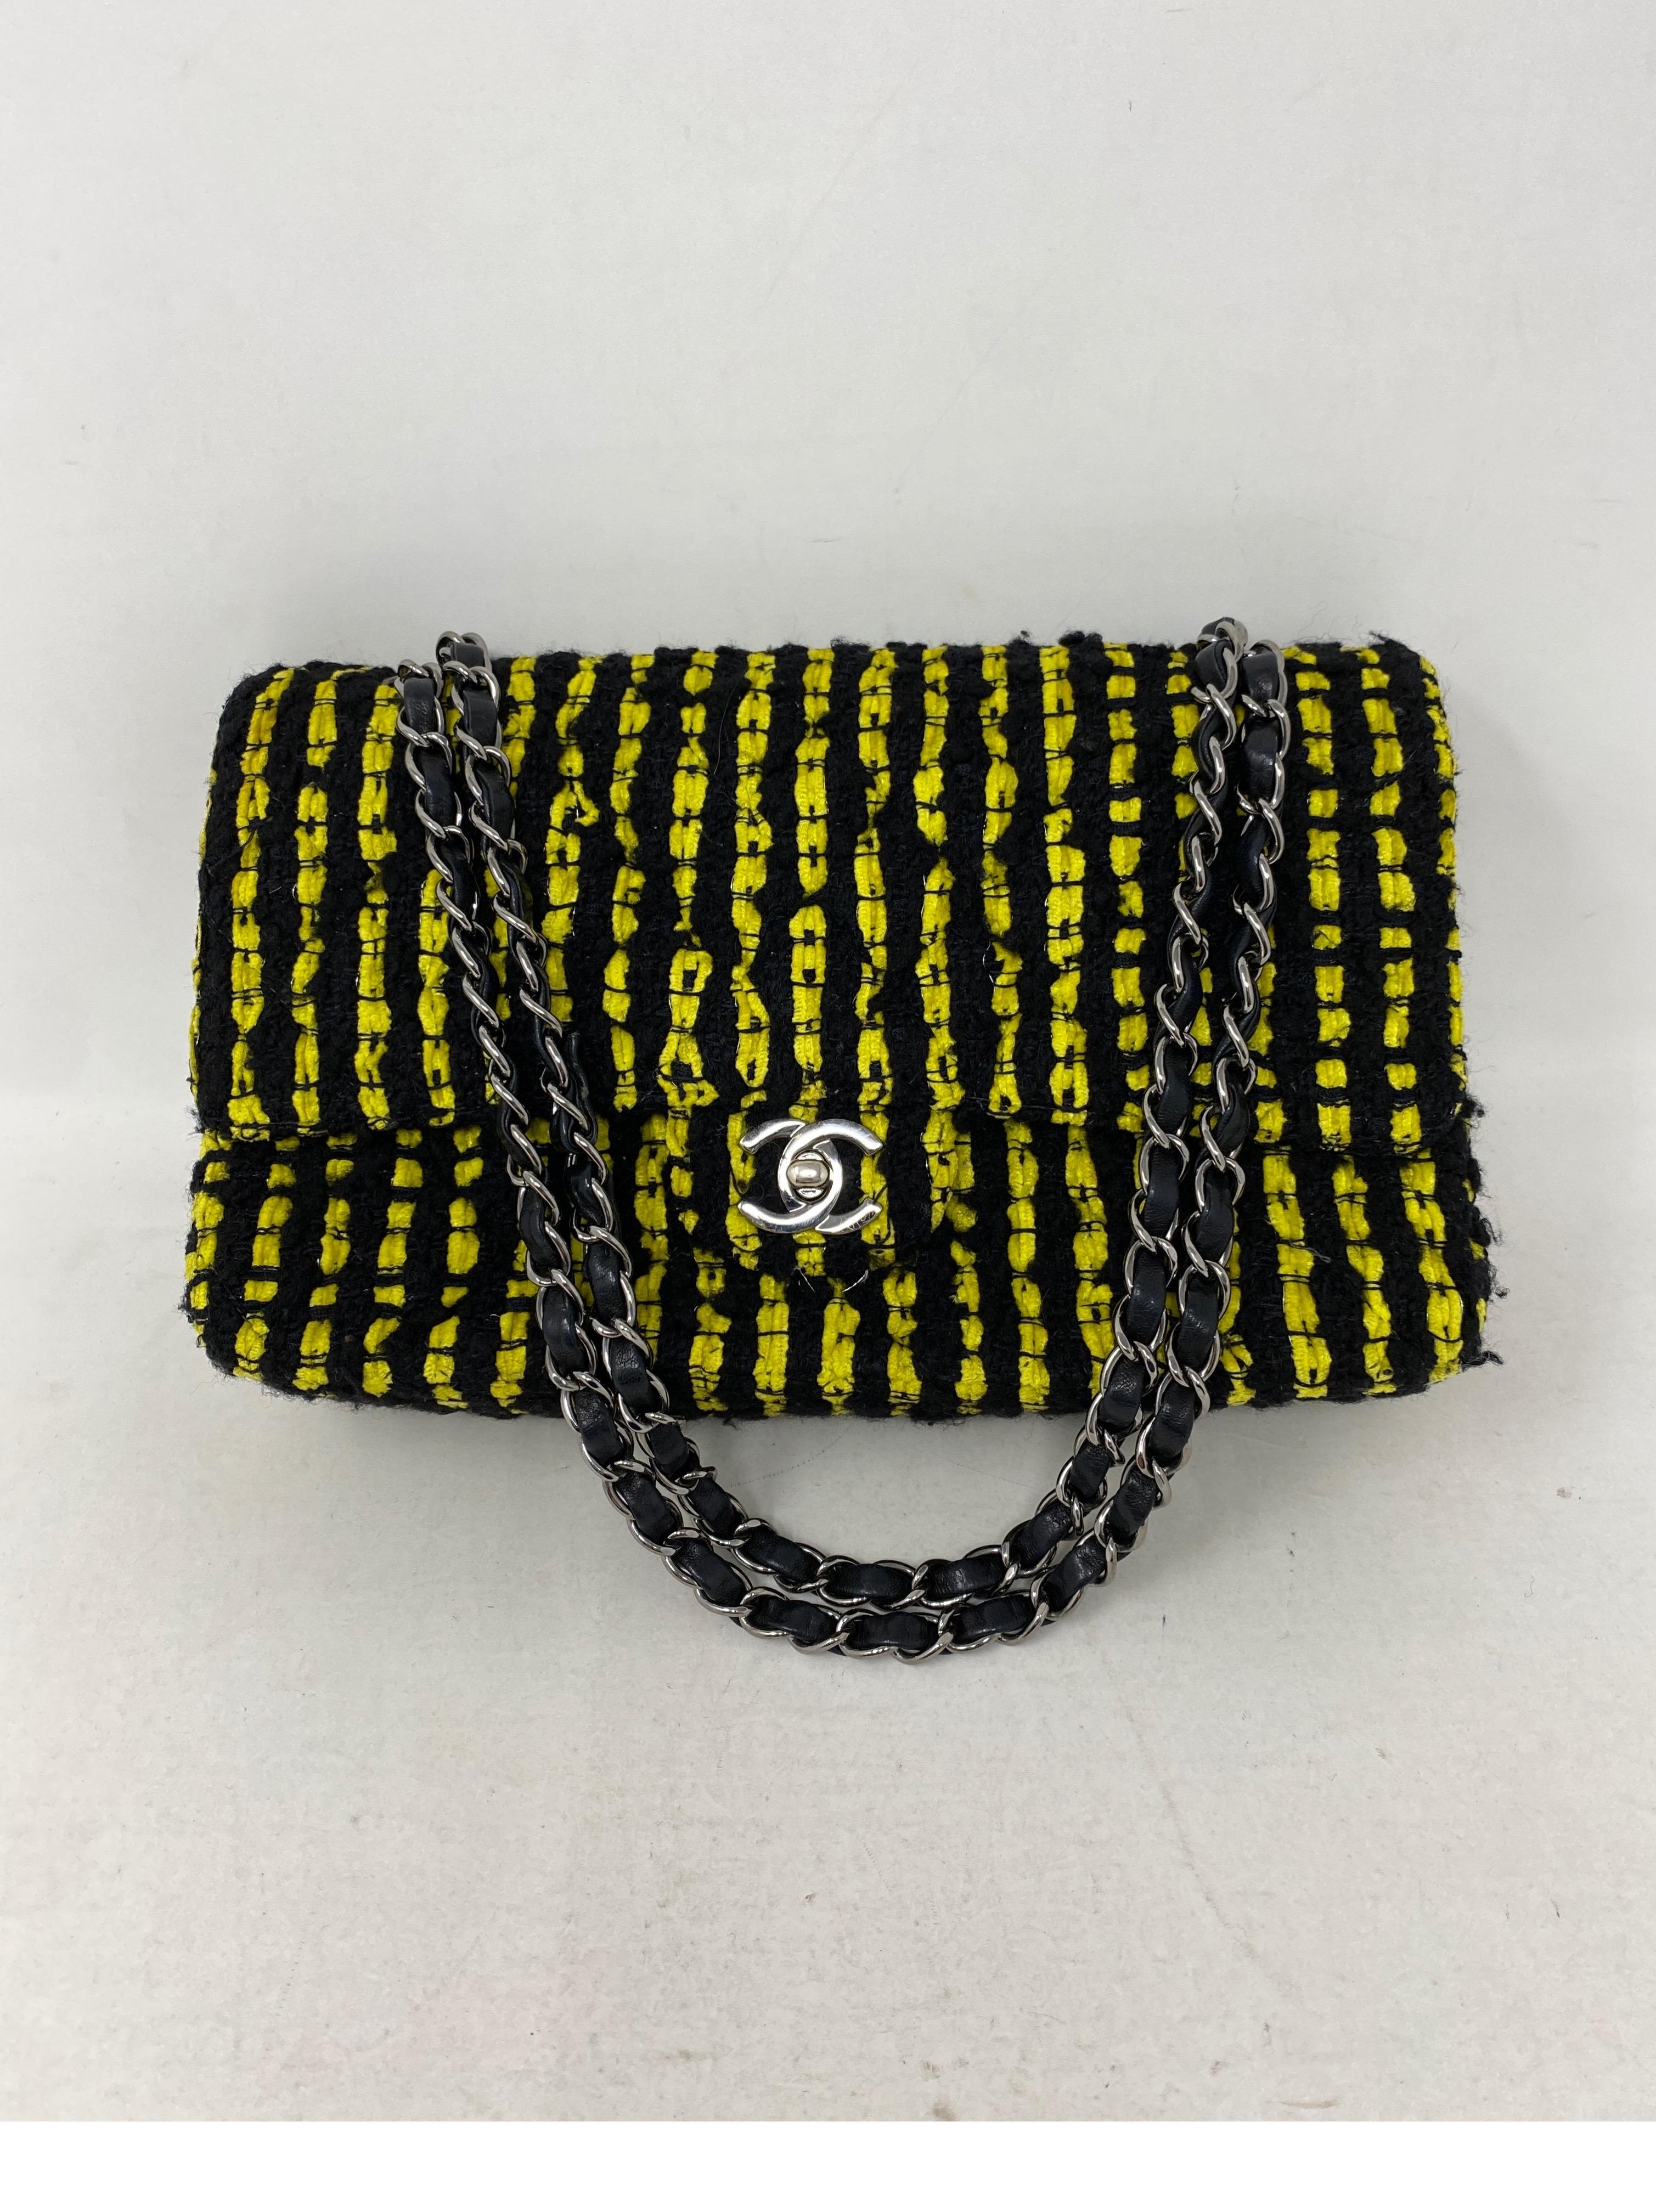 Chanel Yellow and Black Tweed Bag. Double flap bag. Black leather interior. Mint like new condition. Rare and limited collection. Guaranteed authentic. 